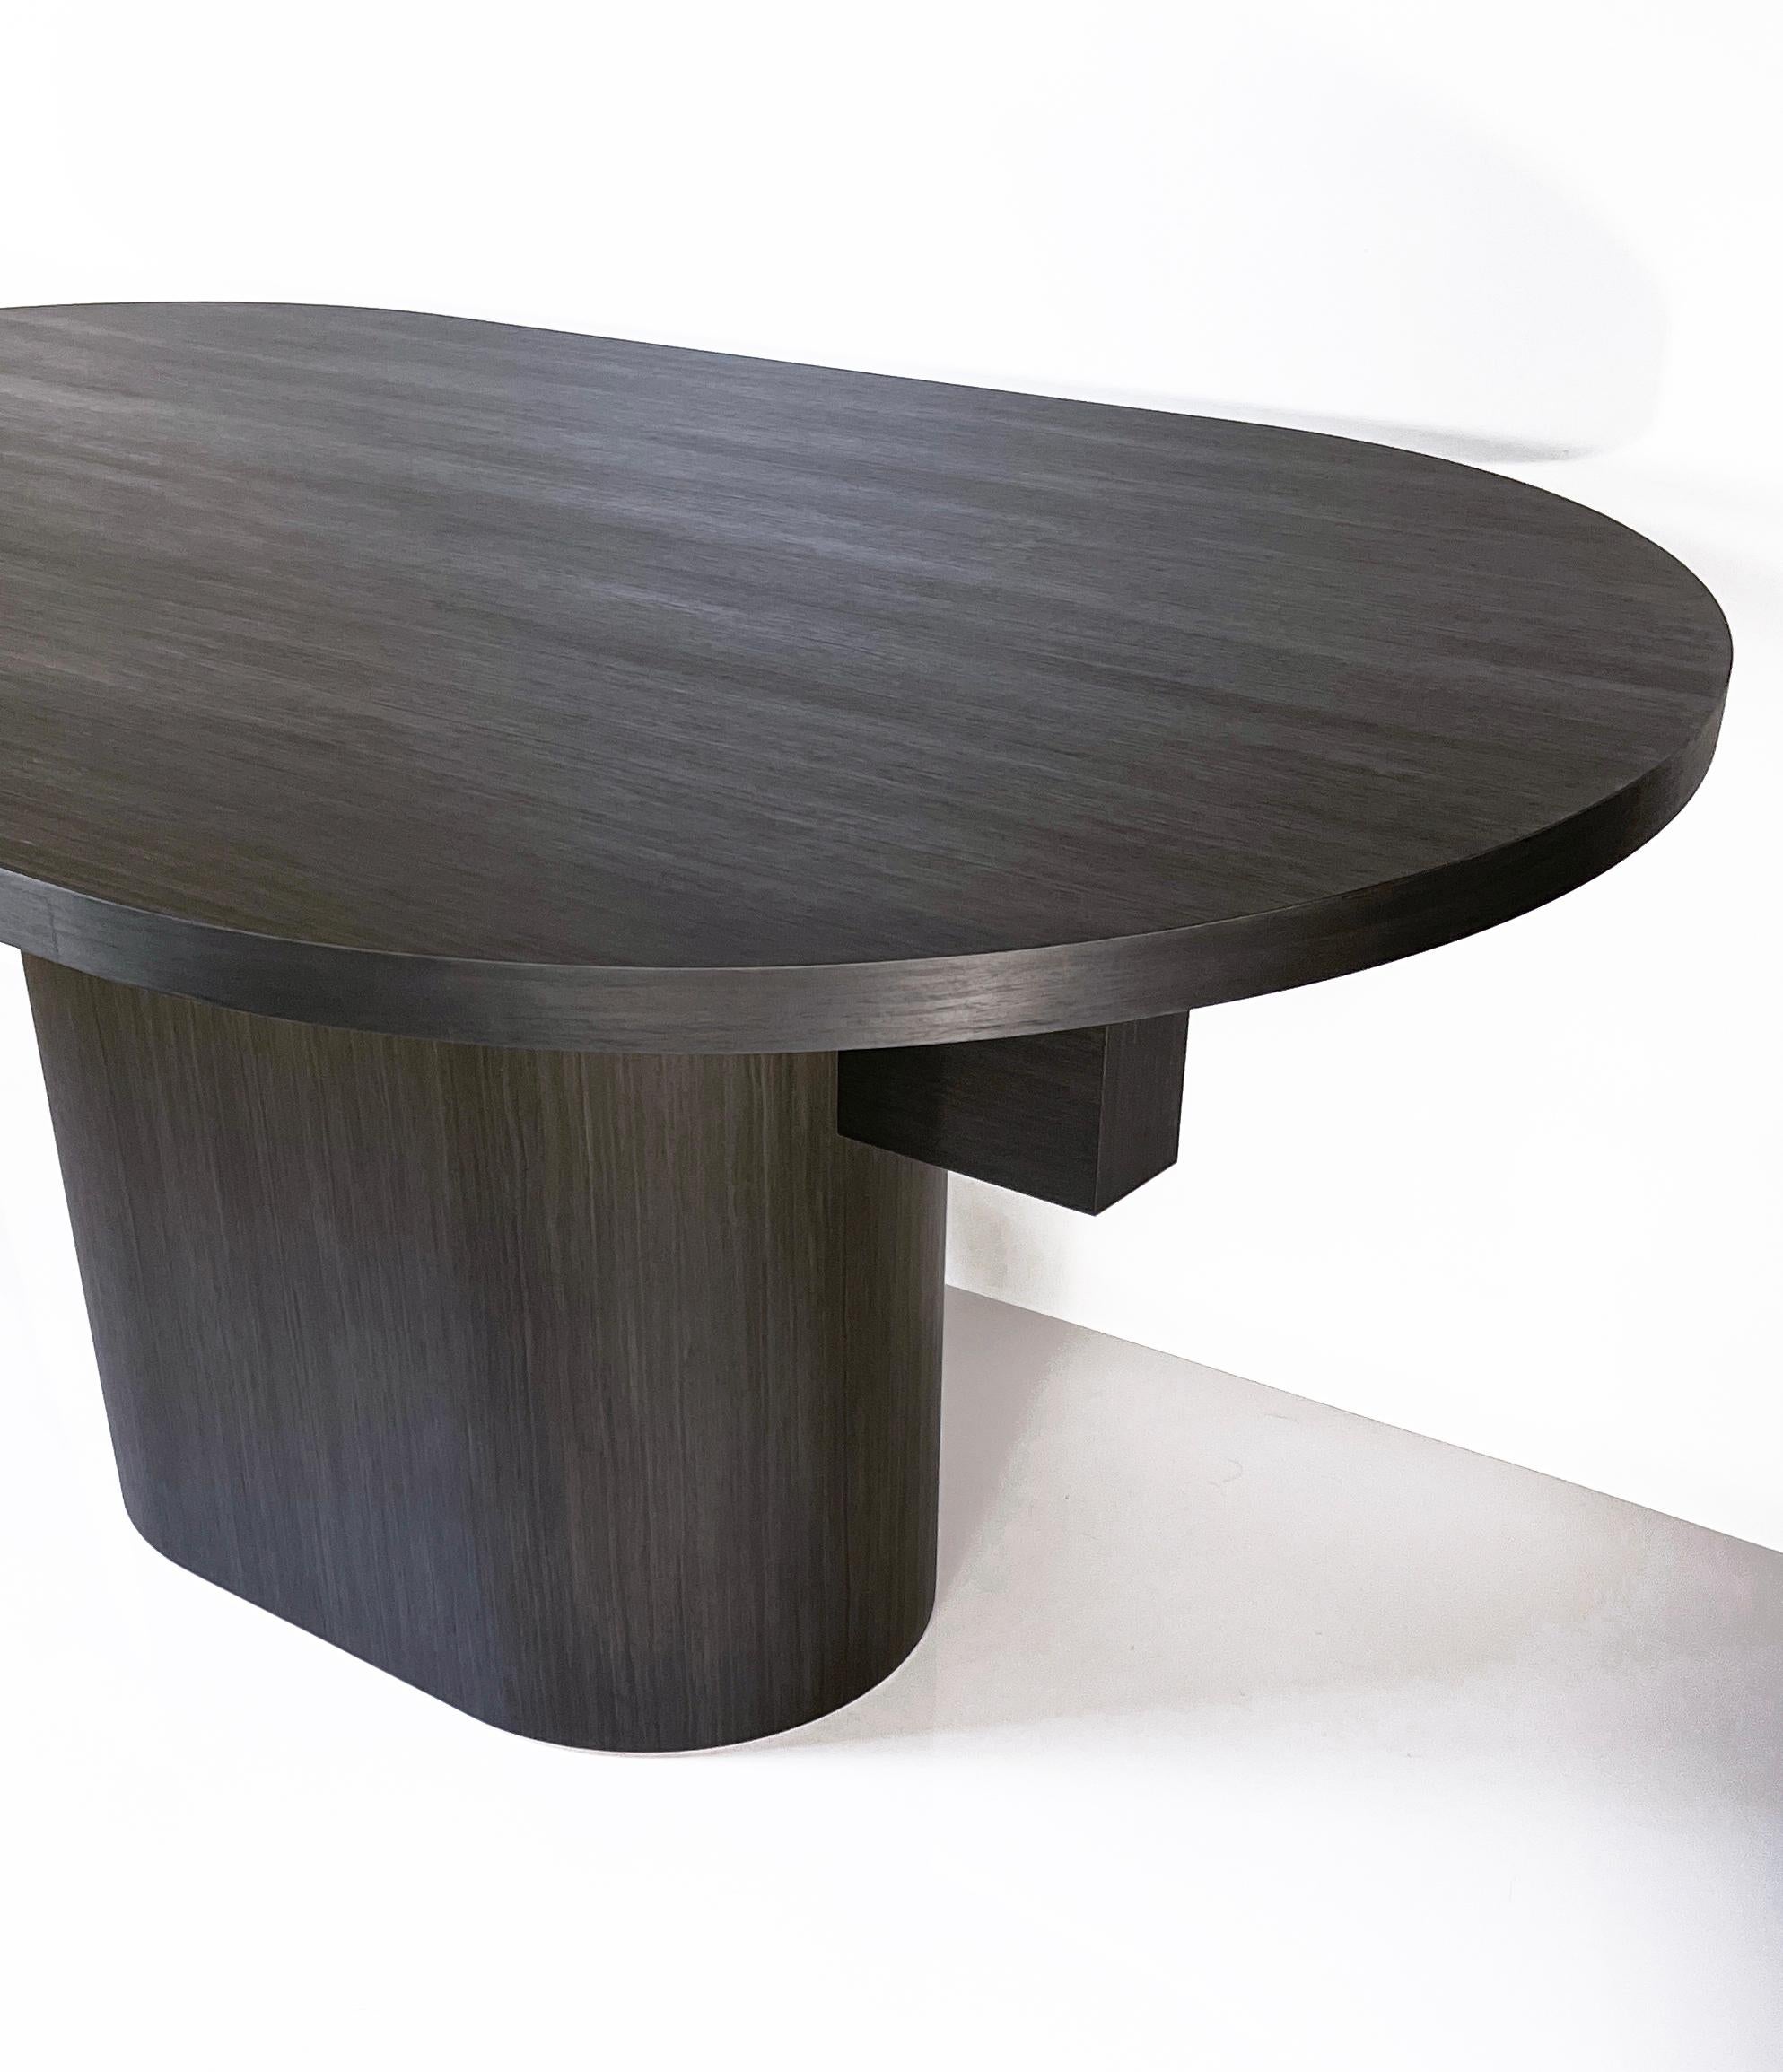 American Sebring, the Latest and Most Versatile Table from William Earle